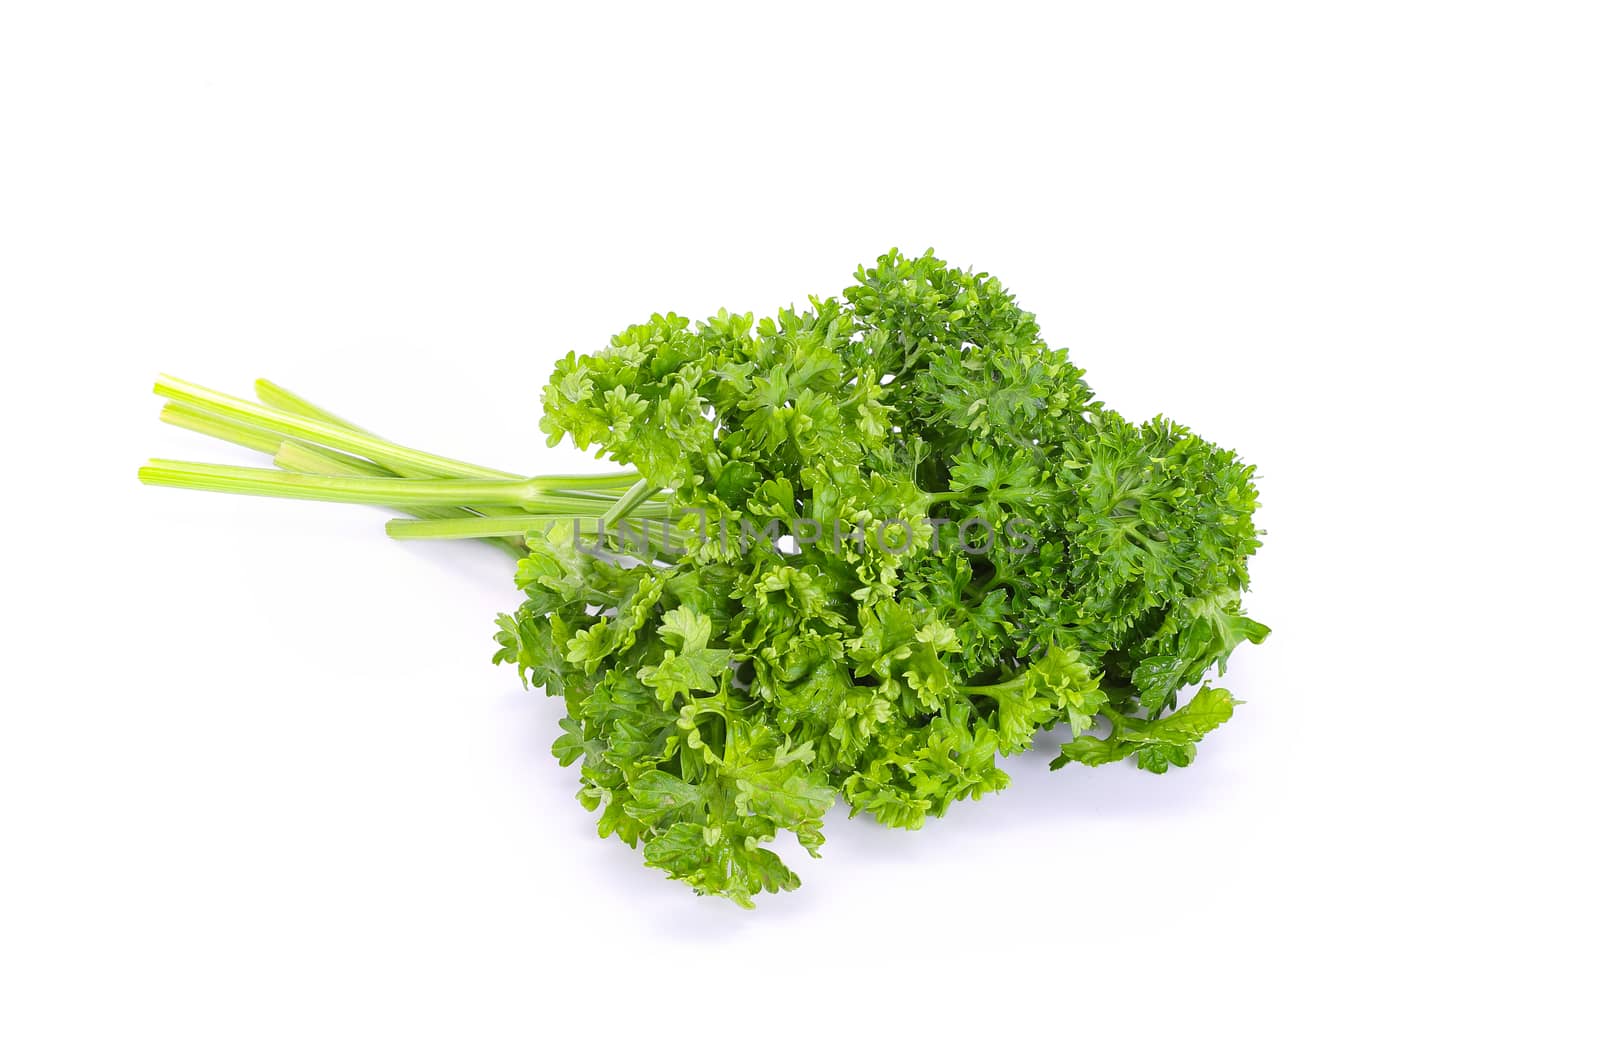 Top view of fresh organic coriander isolated on white background